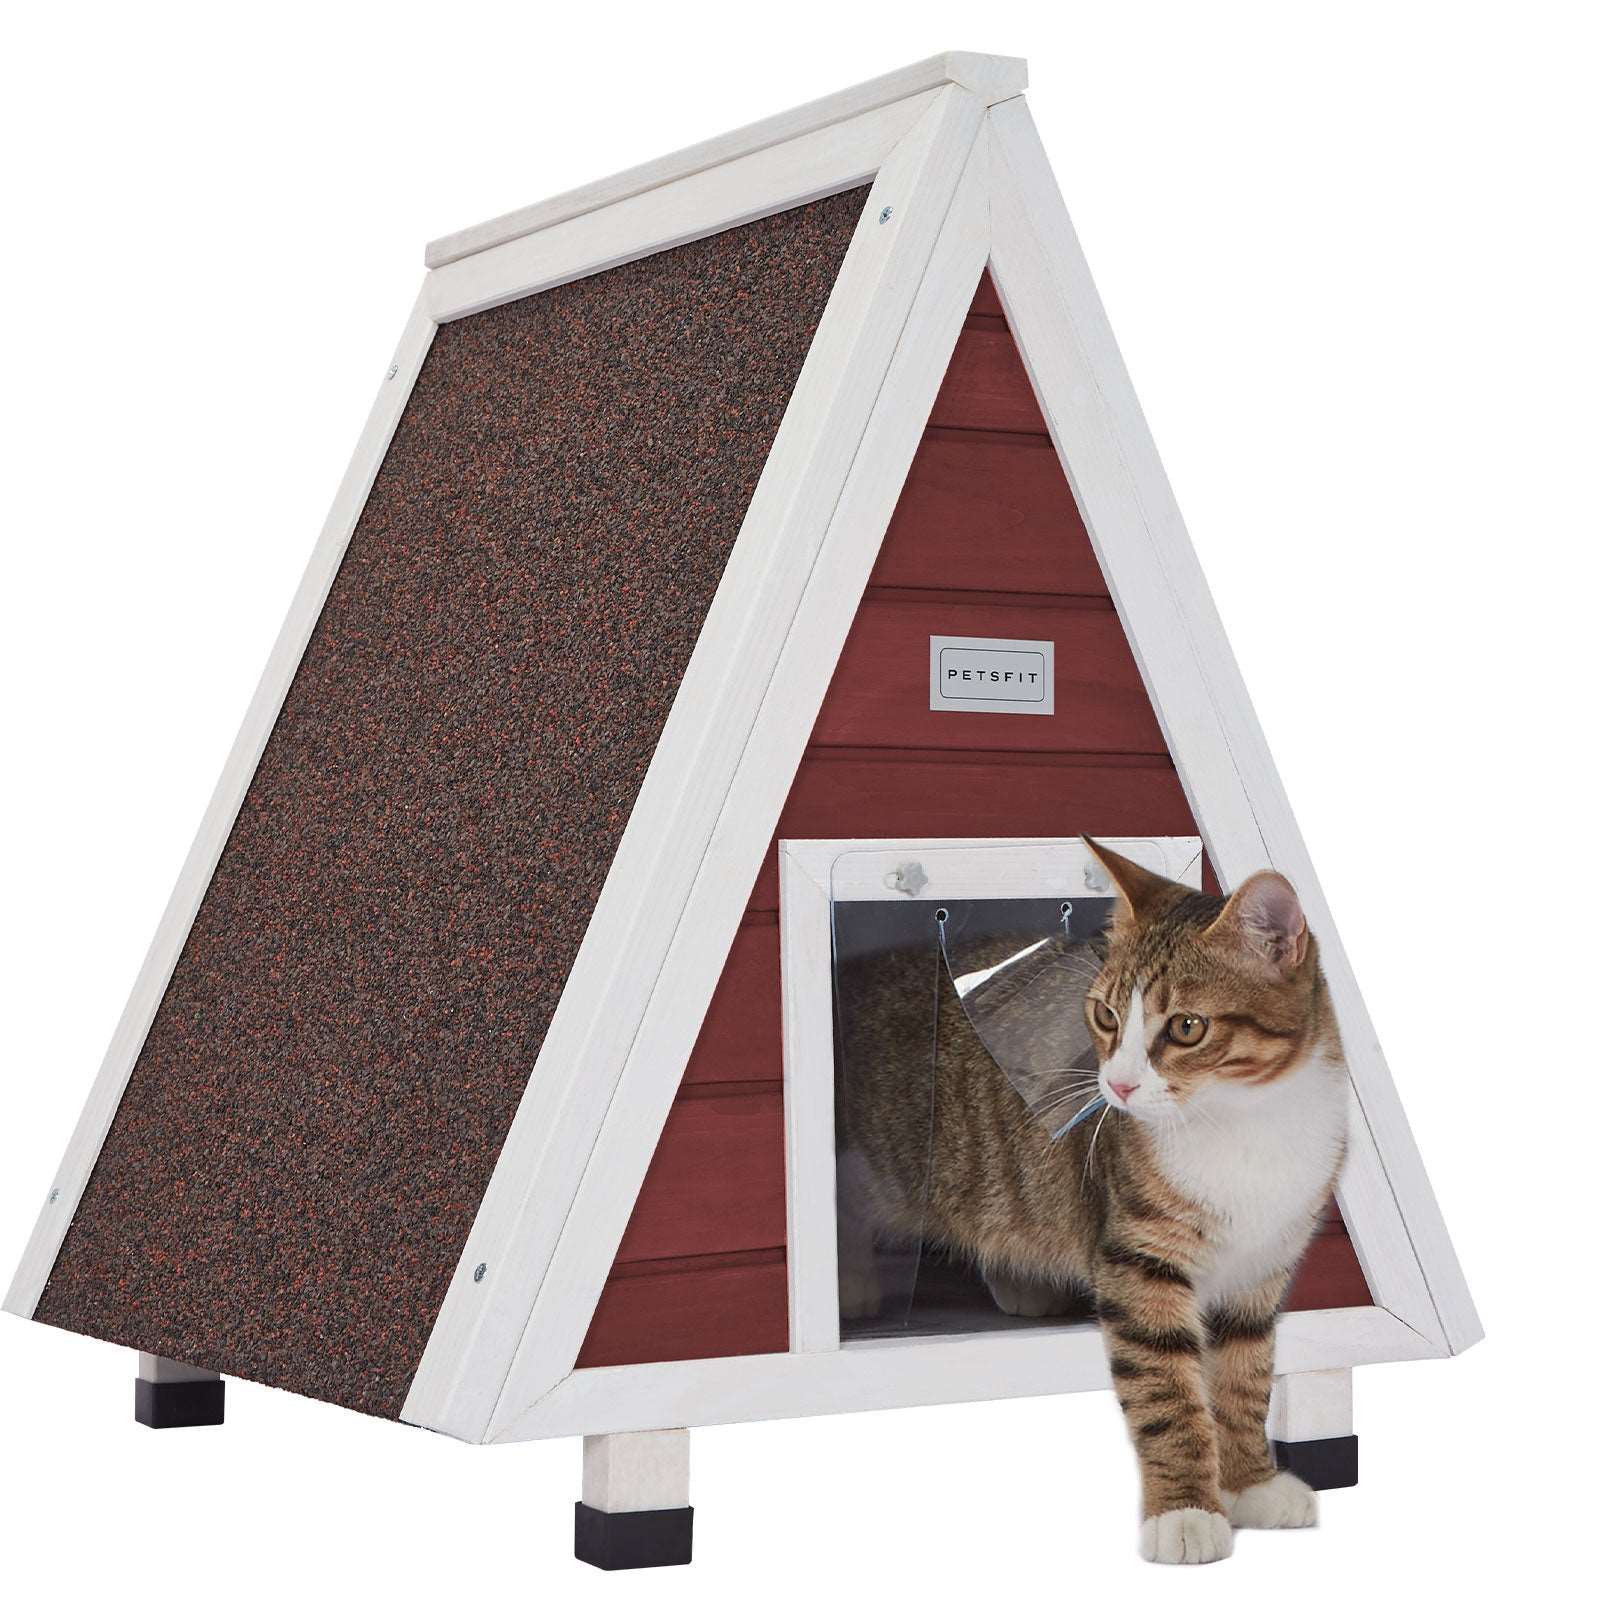 PETSFIT-Single-Story-Triangular-Cat-House-With-Foot-Stand-08